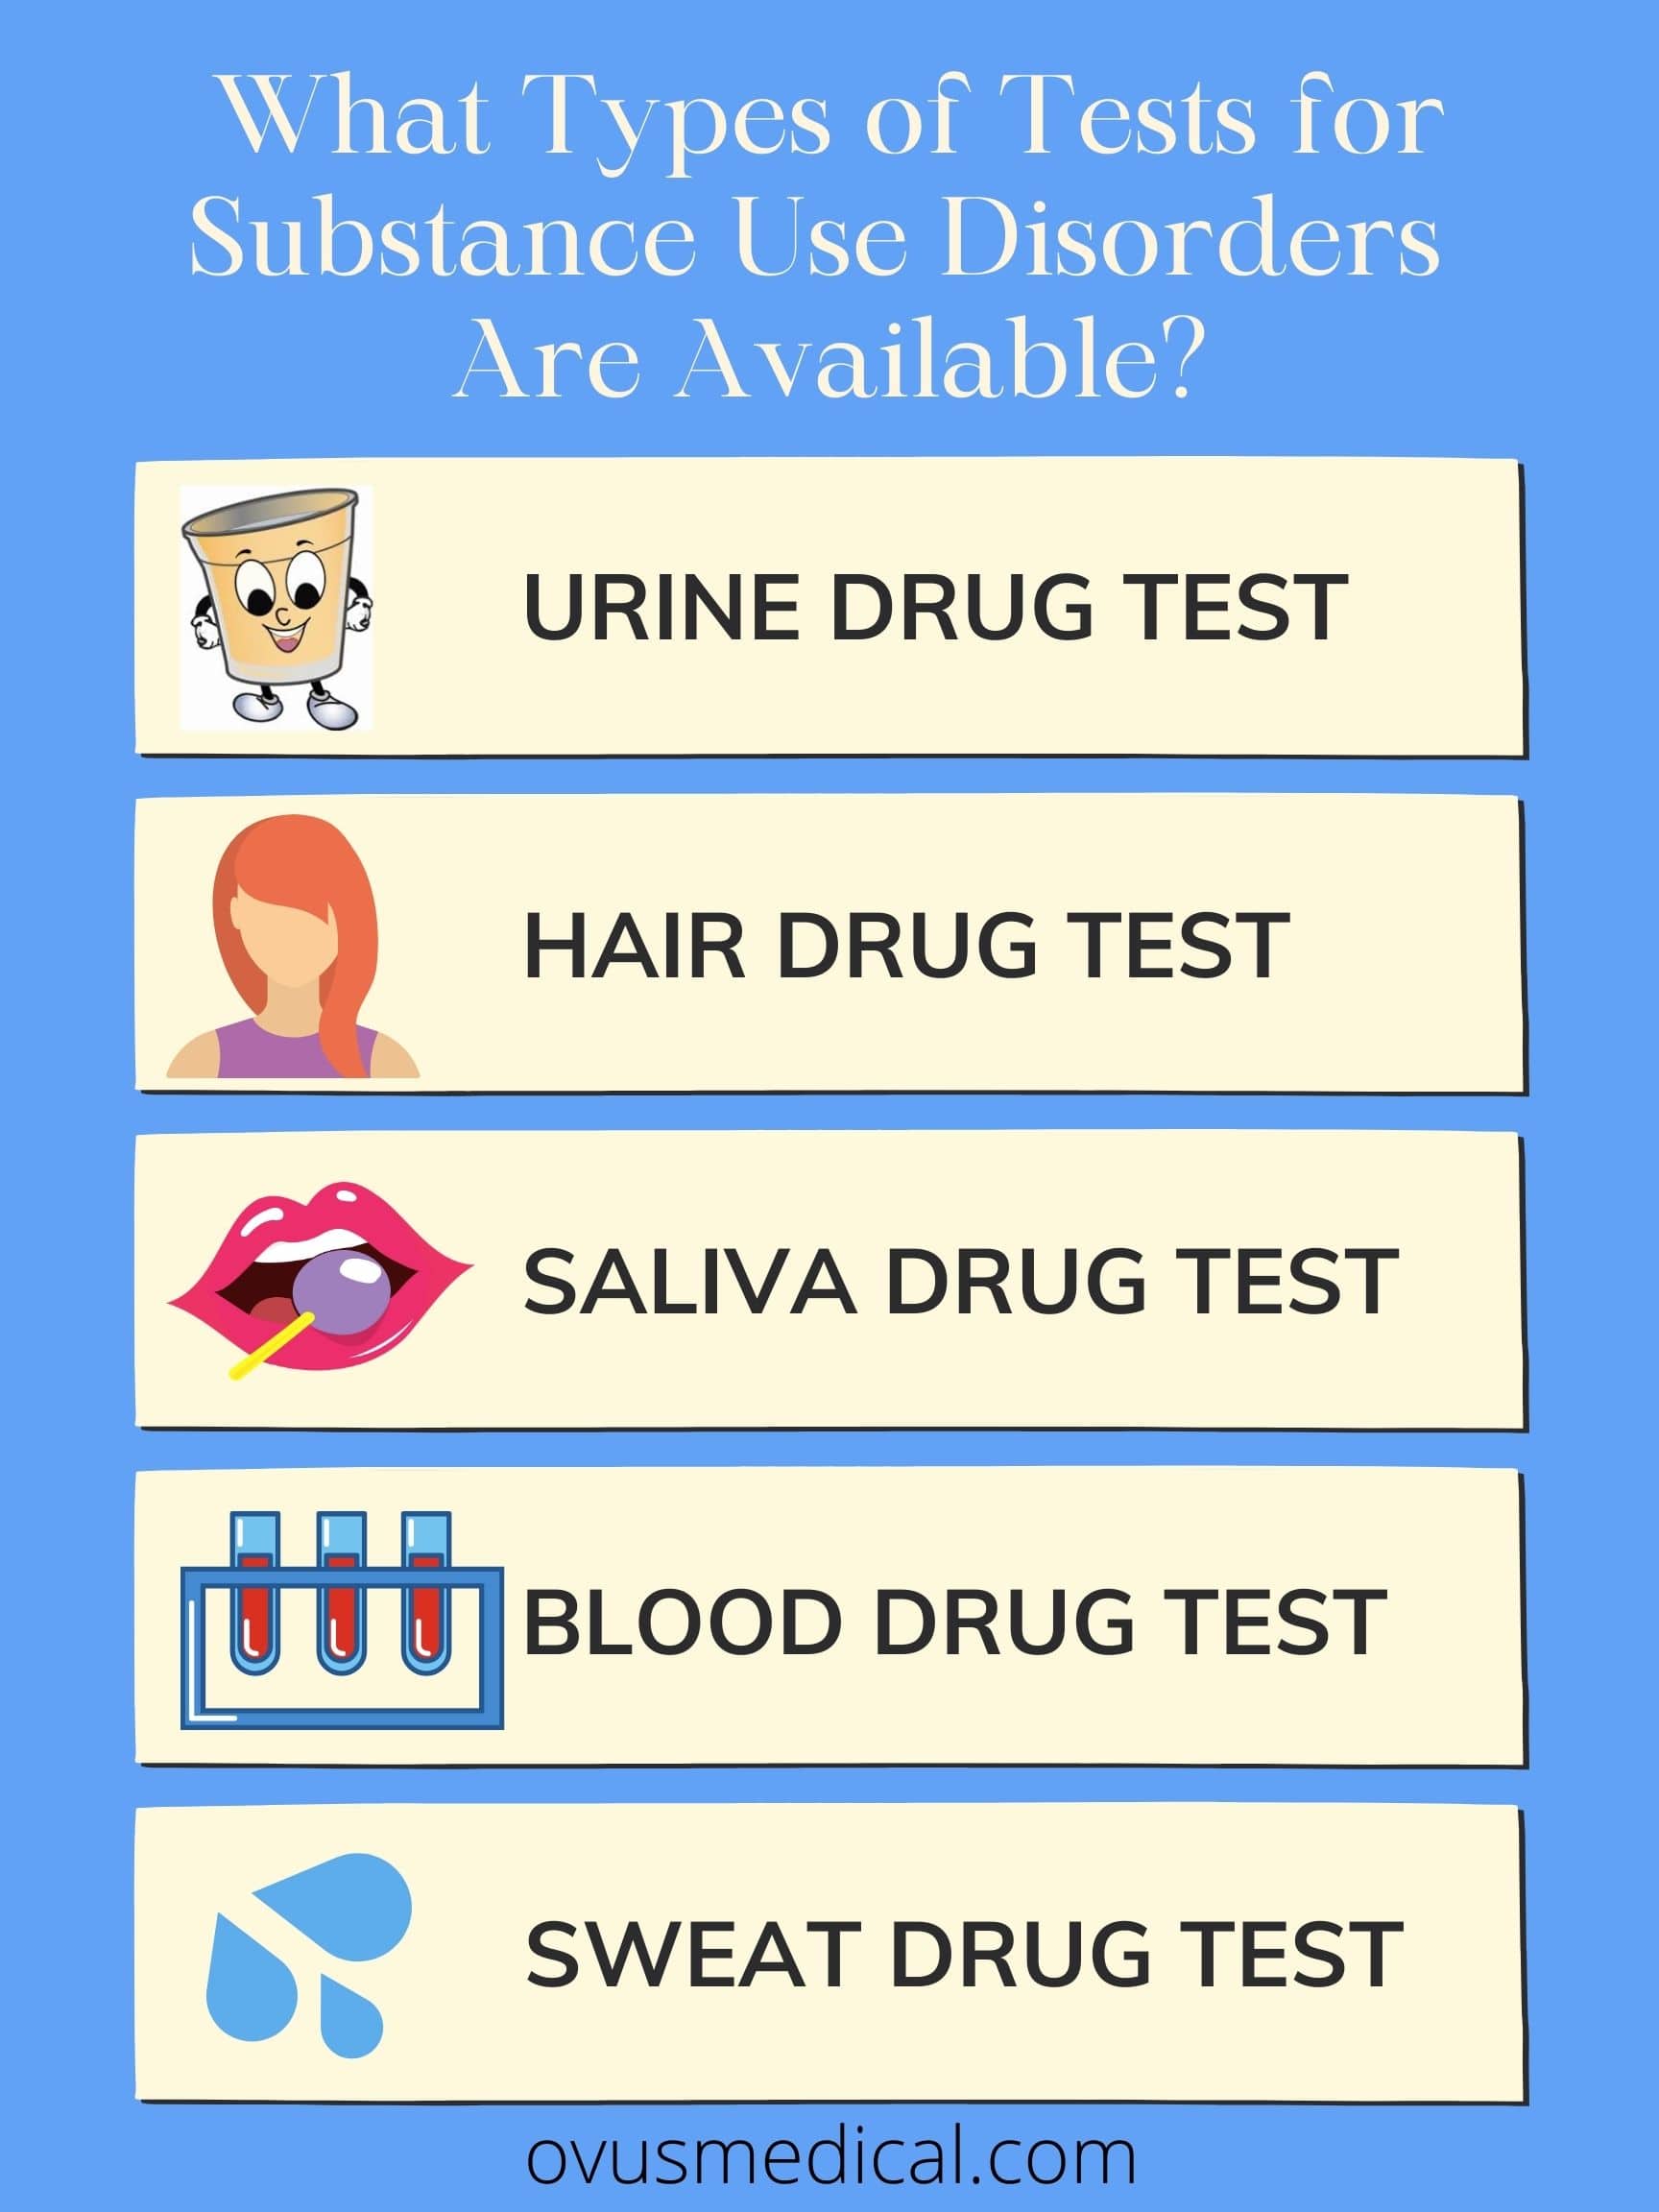 What Types of Tests for Substance Use Disorders Are Available